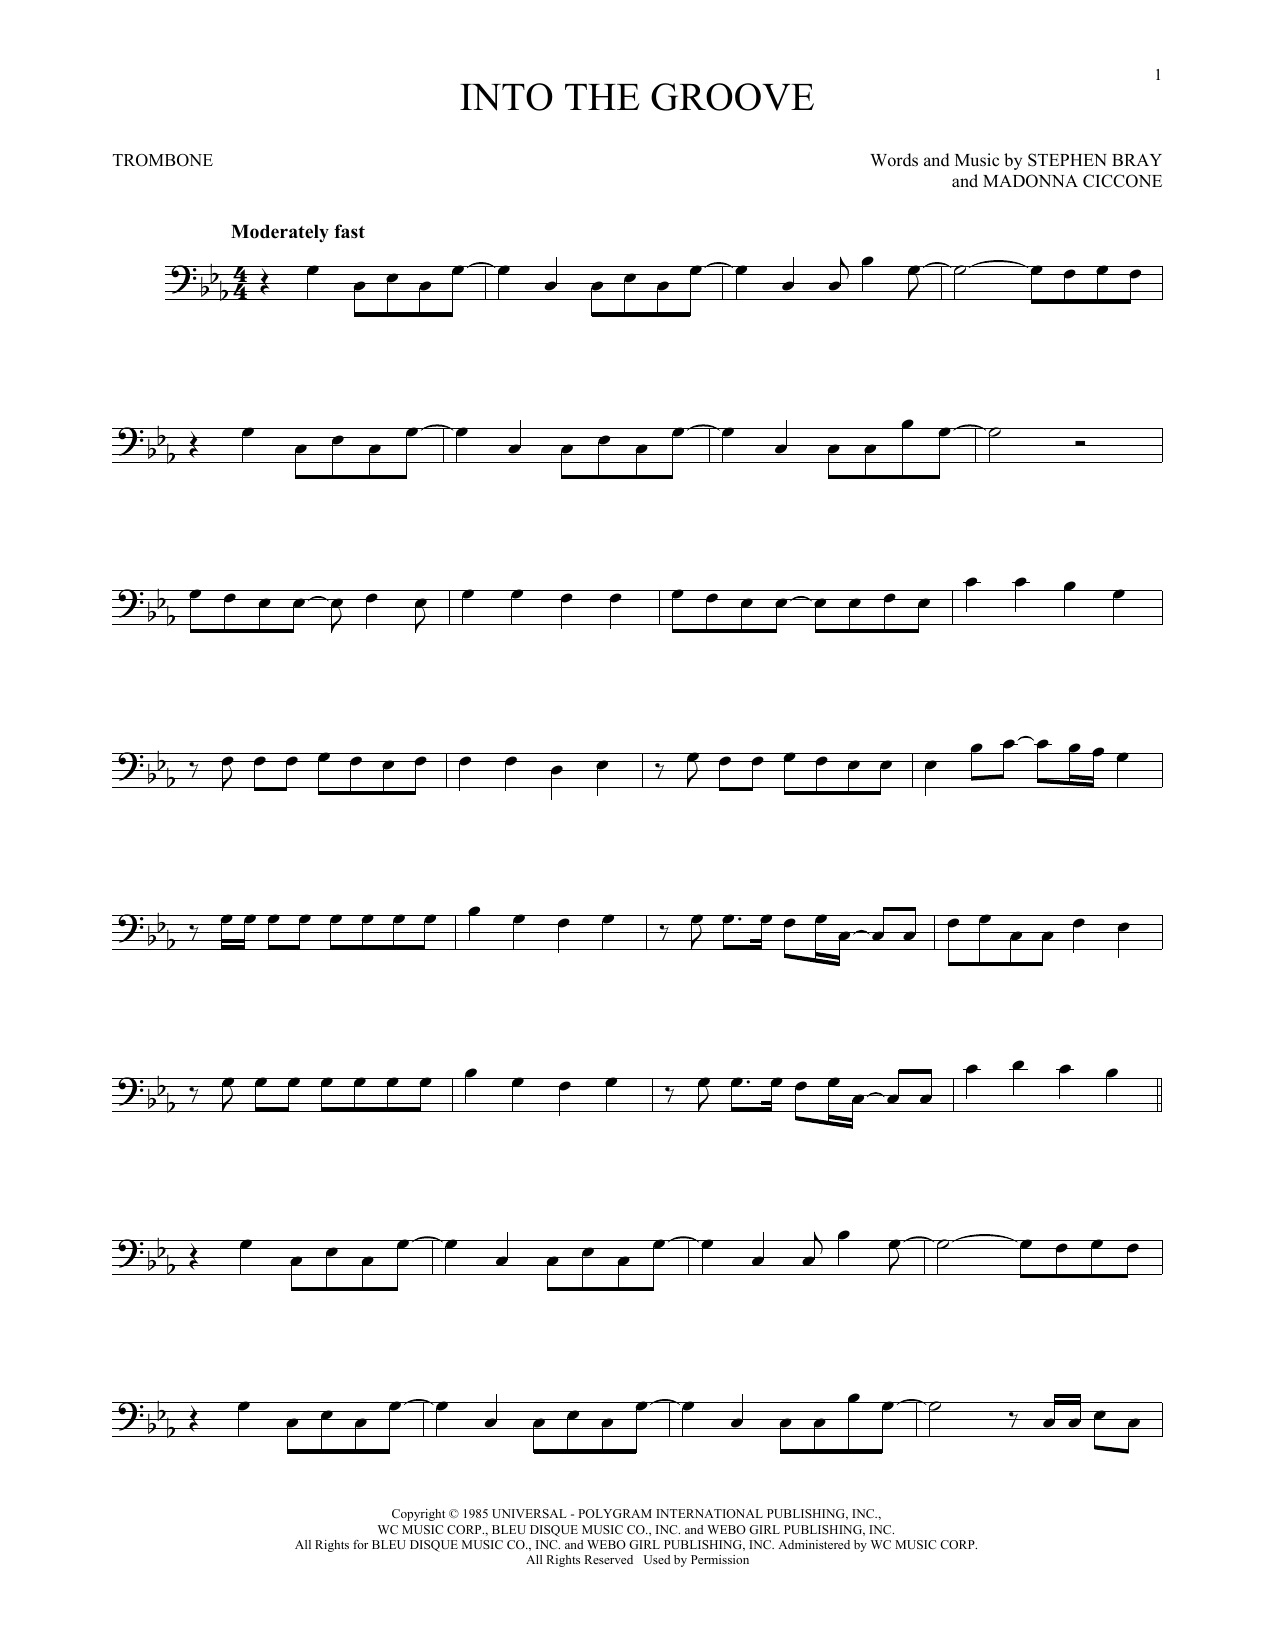 Download Madonna Into The Groove Sheet Music